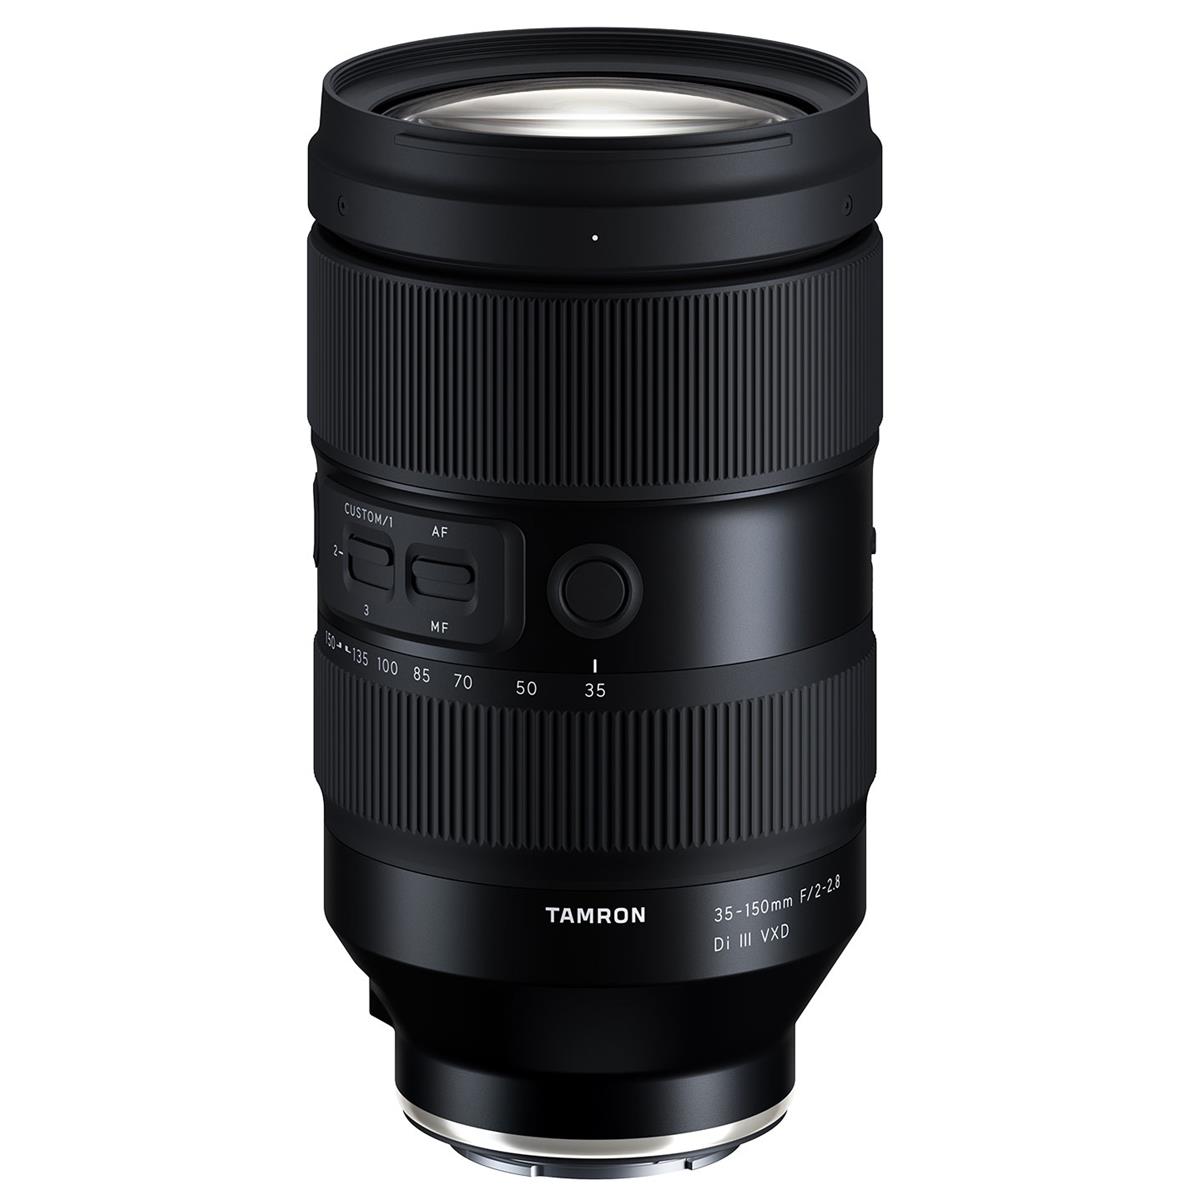 Tamron 35-150mm F2-2.8 Di III VXD Lens for Sony E Mount